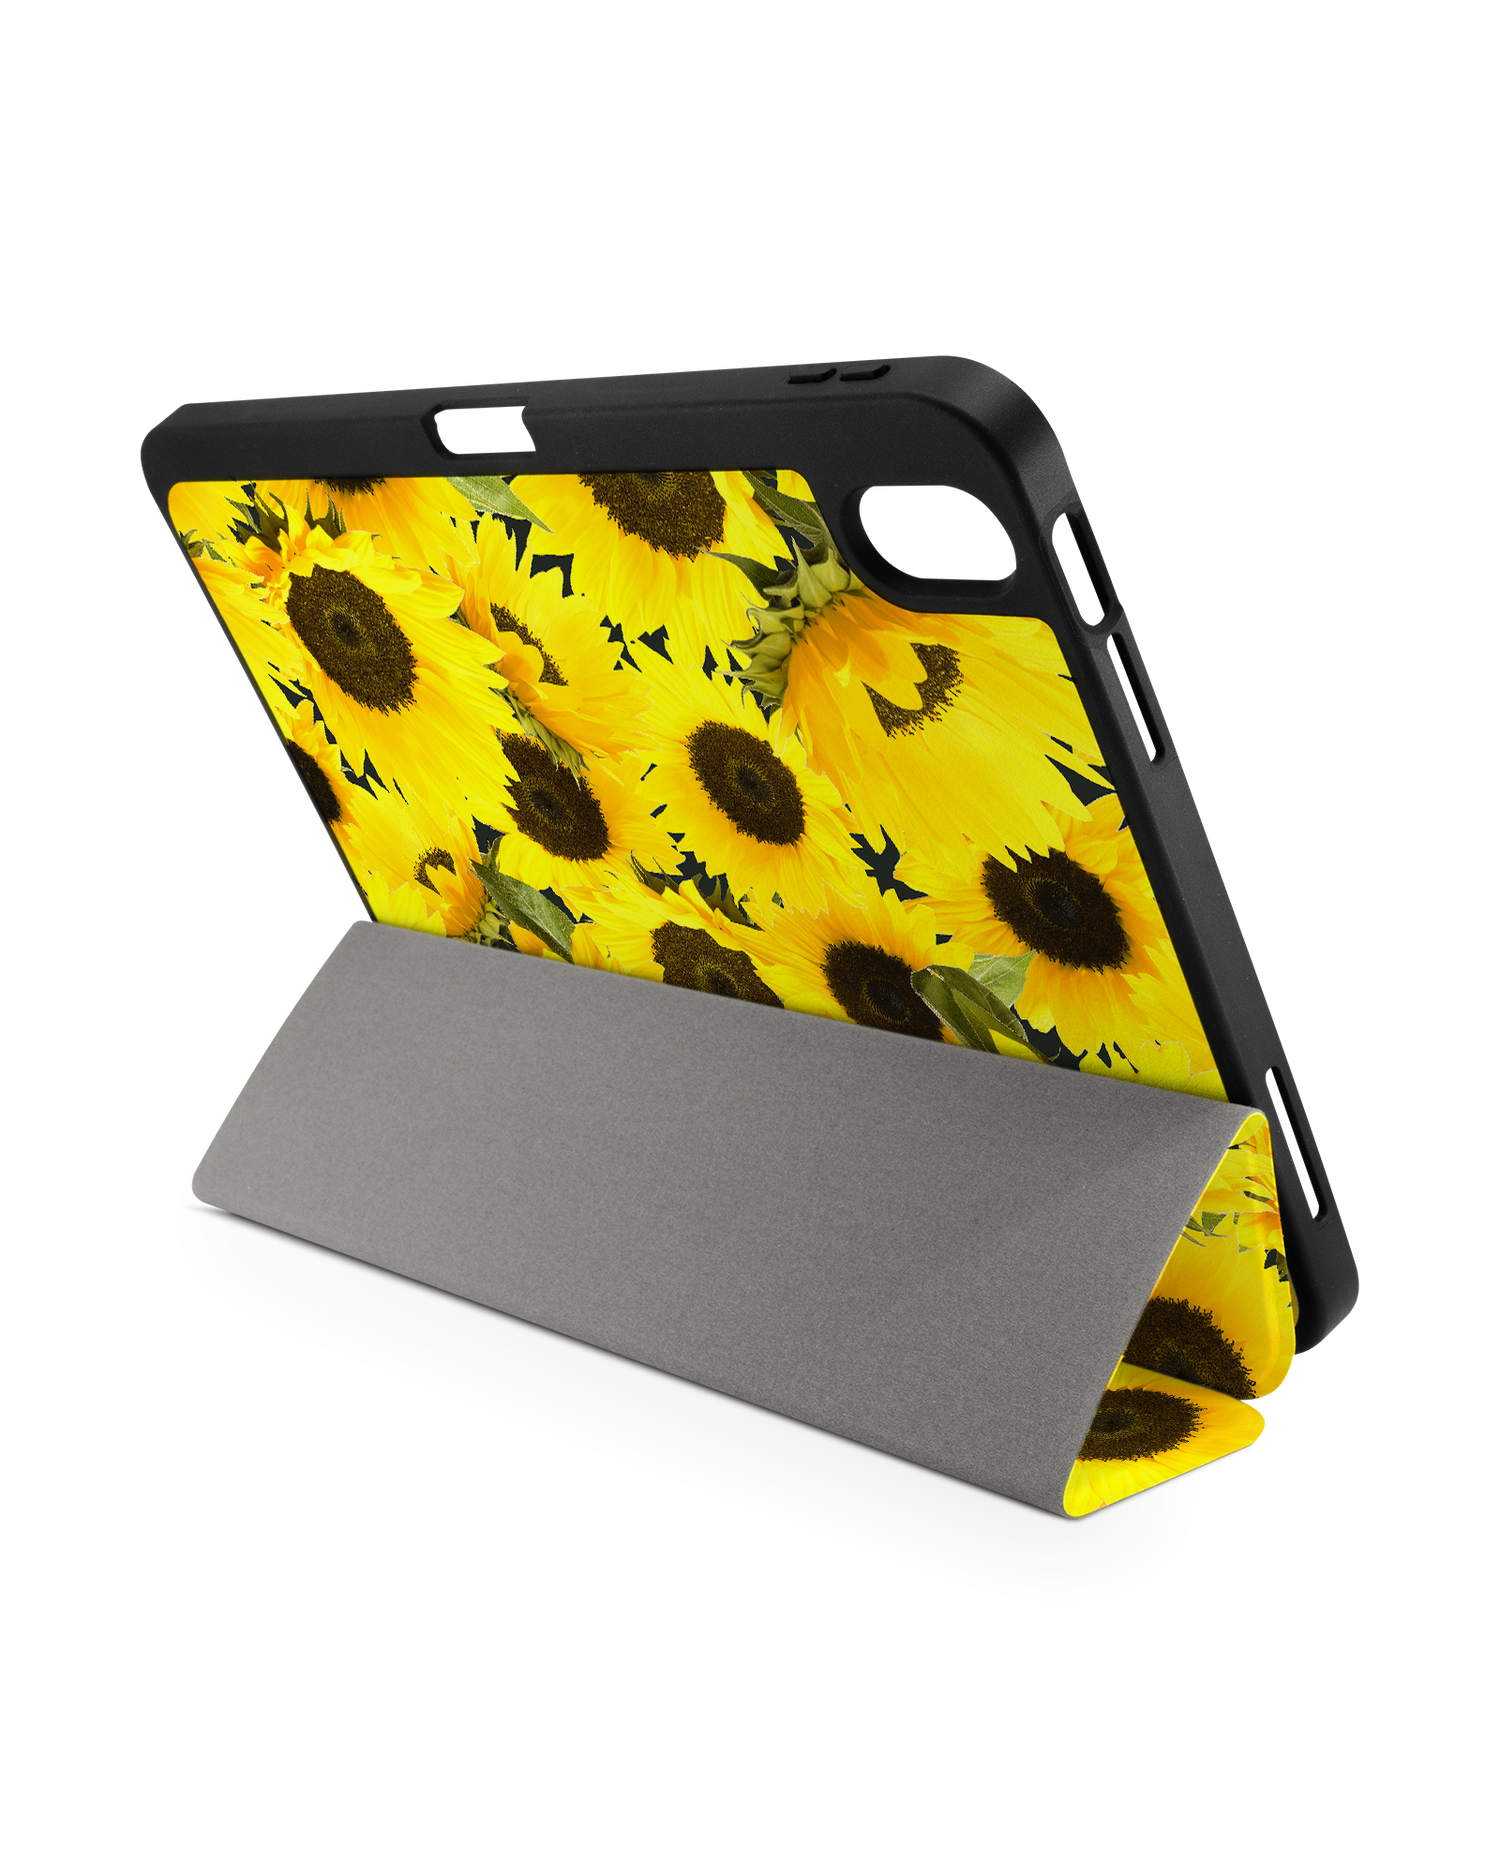 Sunflowers iPad Case with Pencil Holder for Apple iPad (10th Generation): Set up in landscape format (back view)